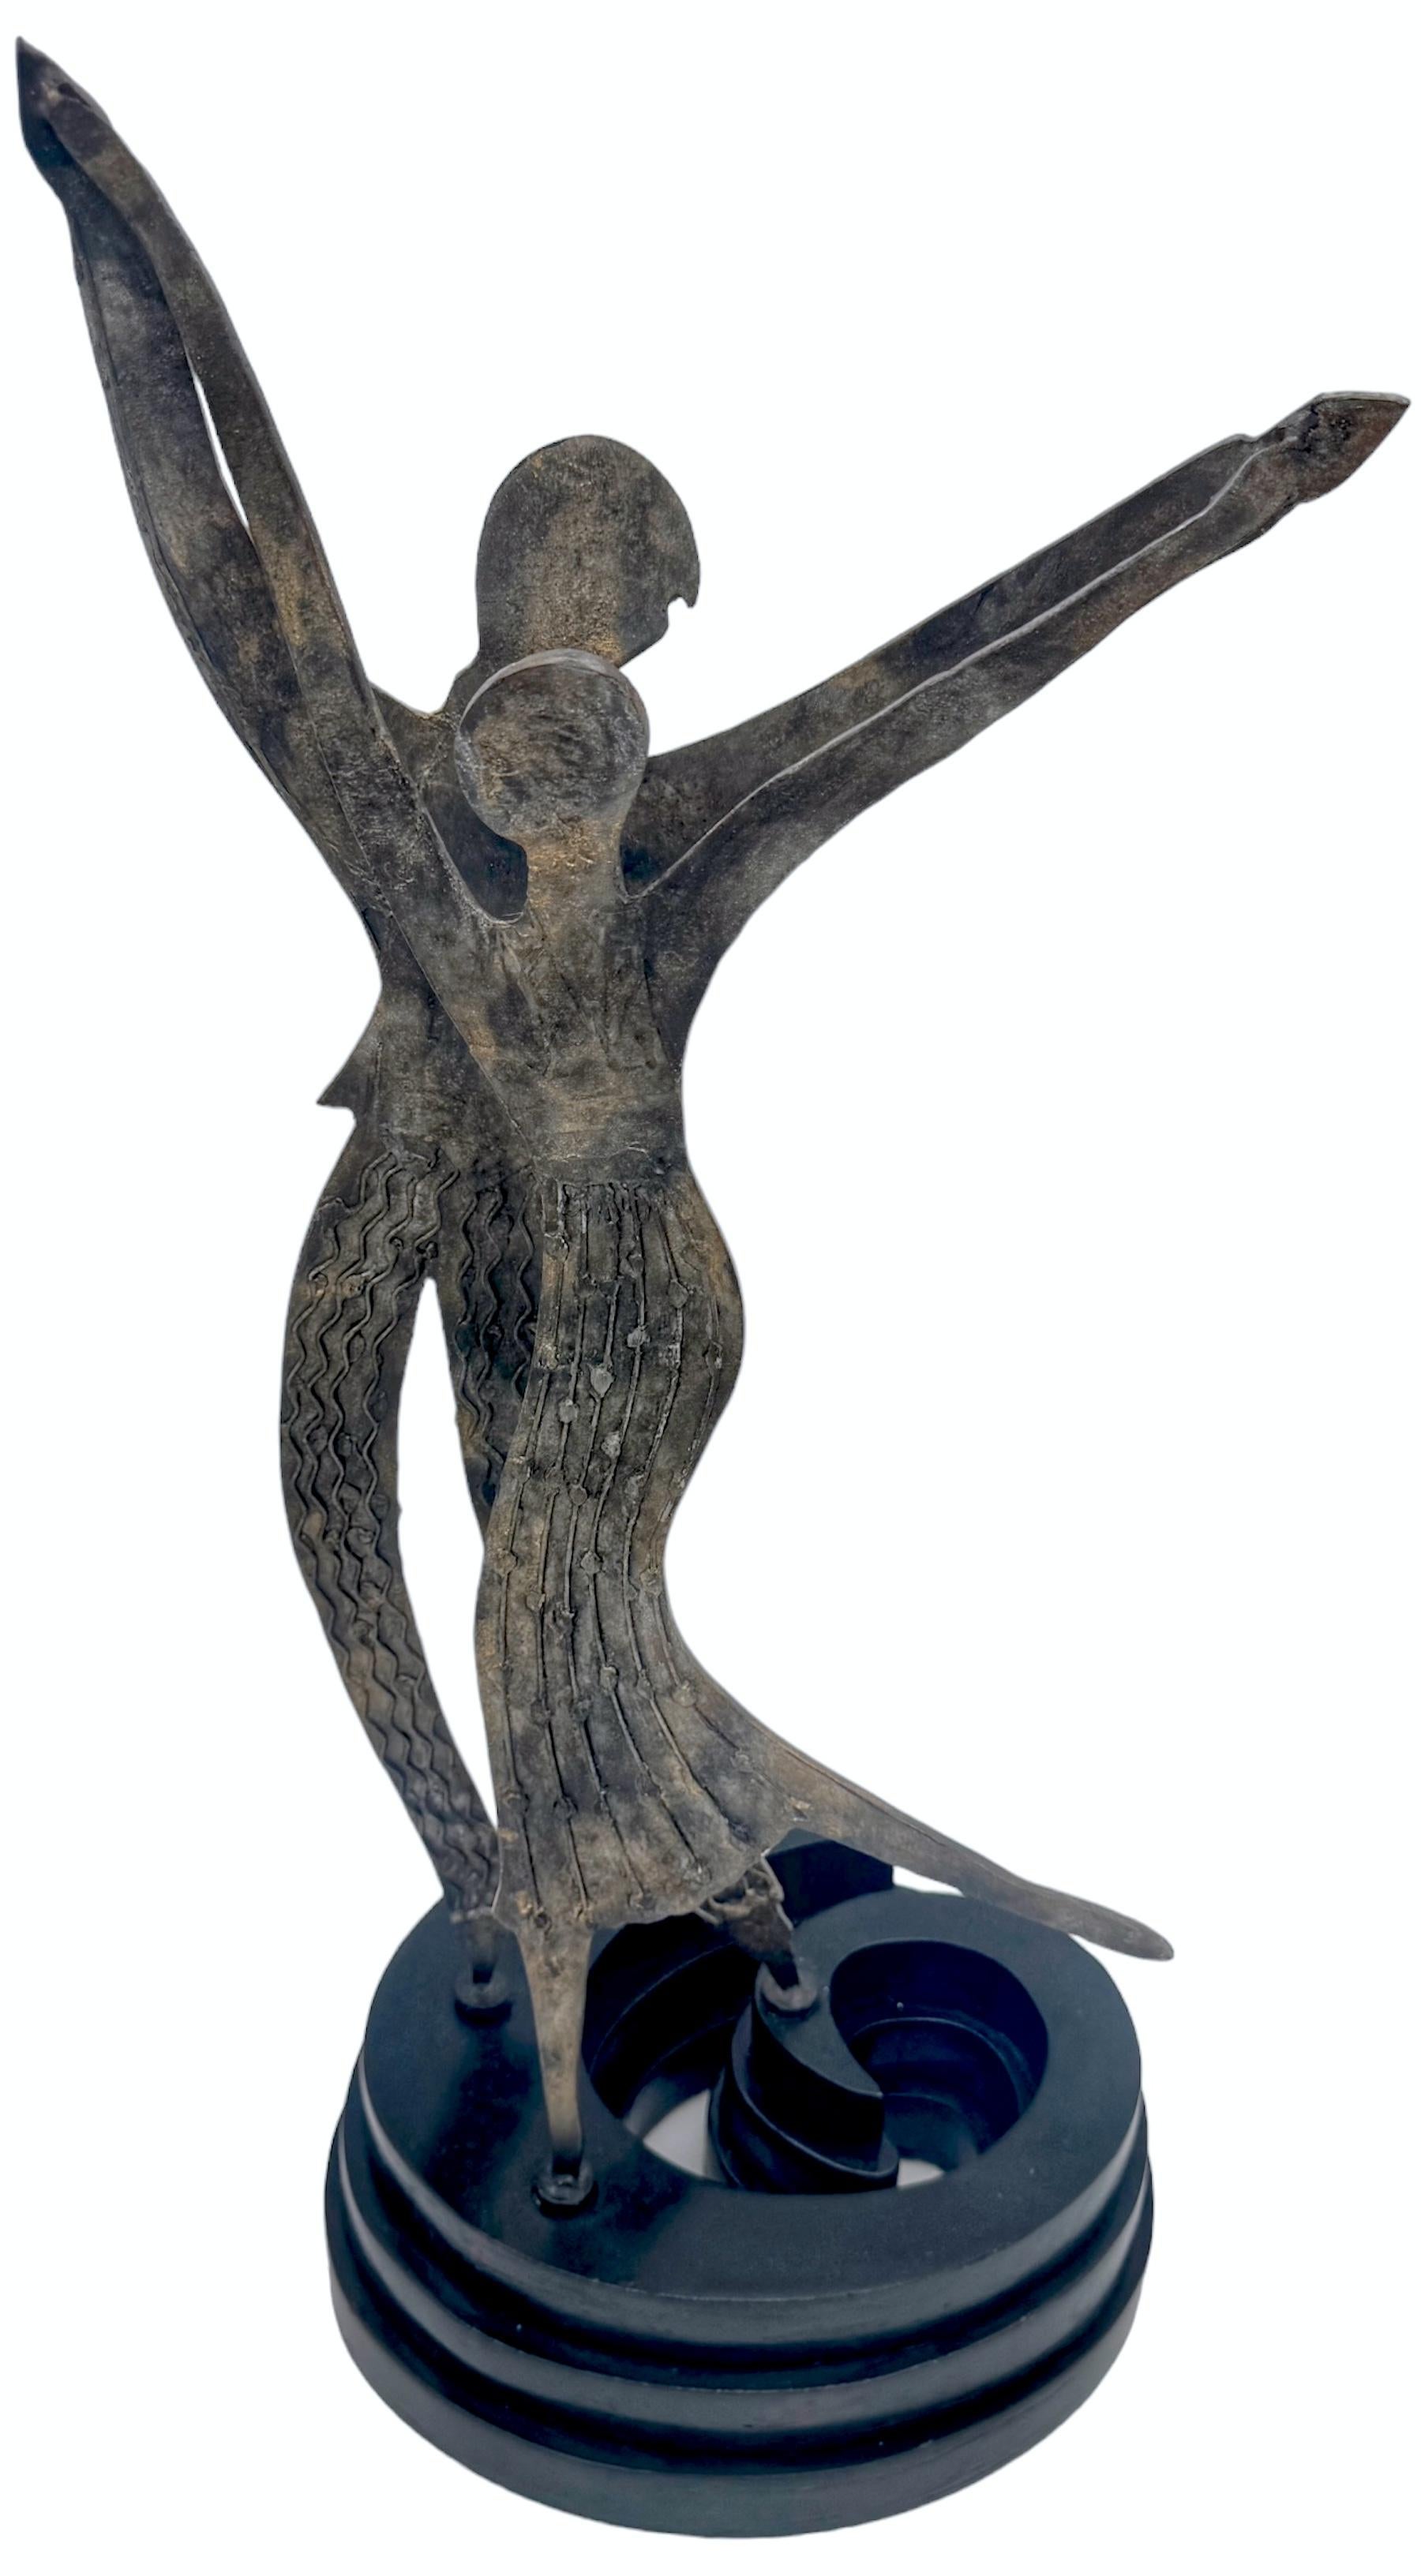 20th Century Art Deco / Moderne Hagenauer Style Silvered Dancing Figures, Germany, 1930s For Sale